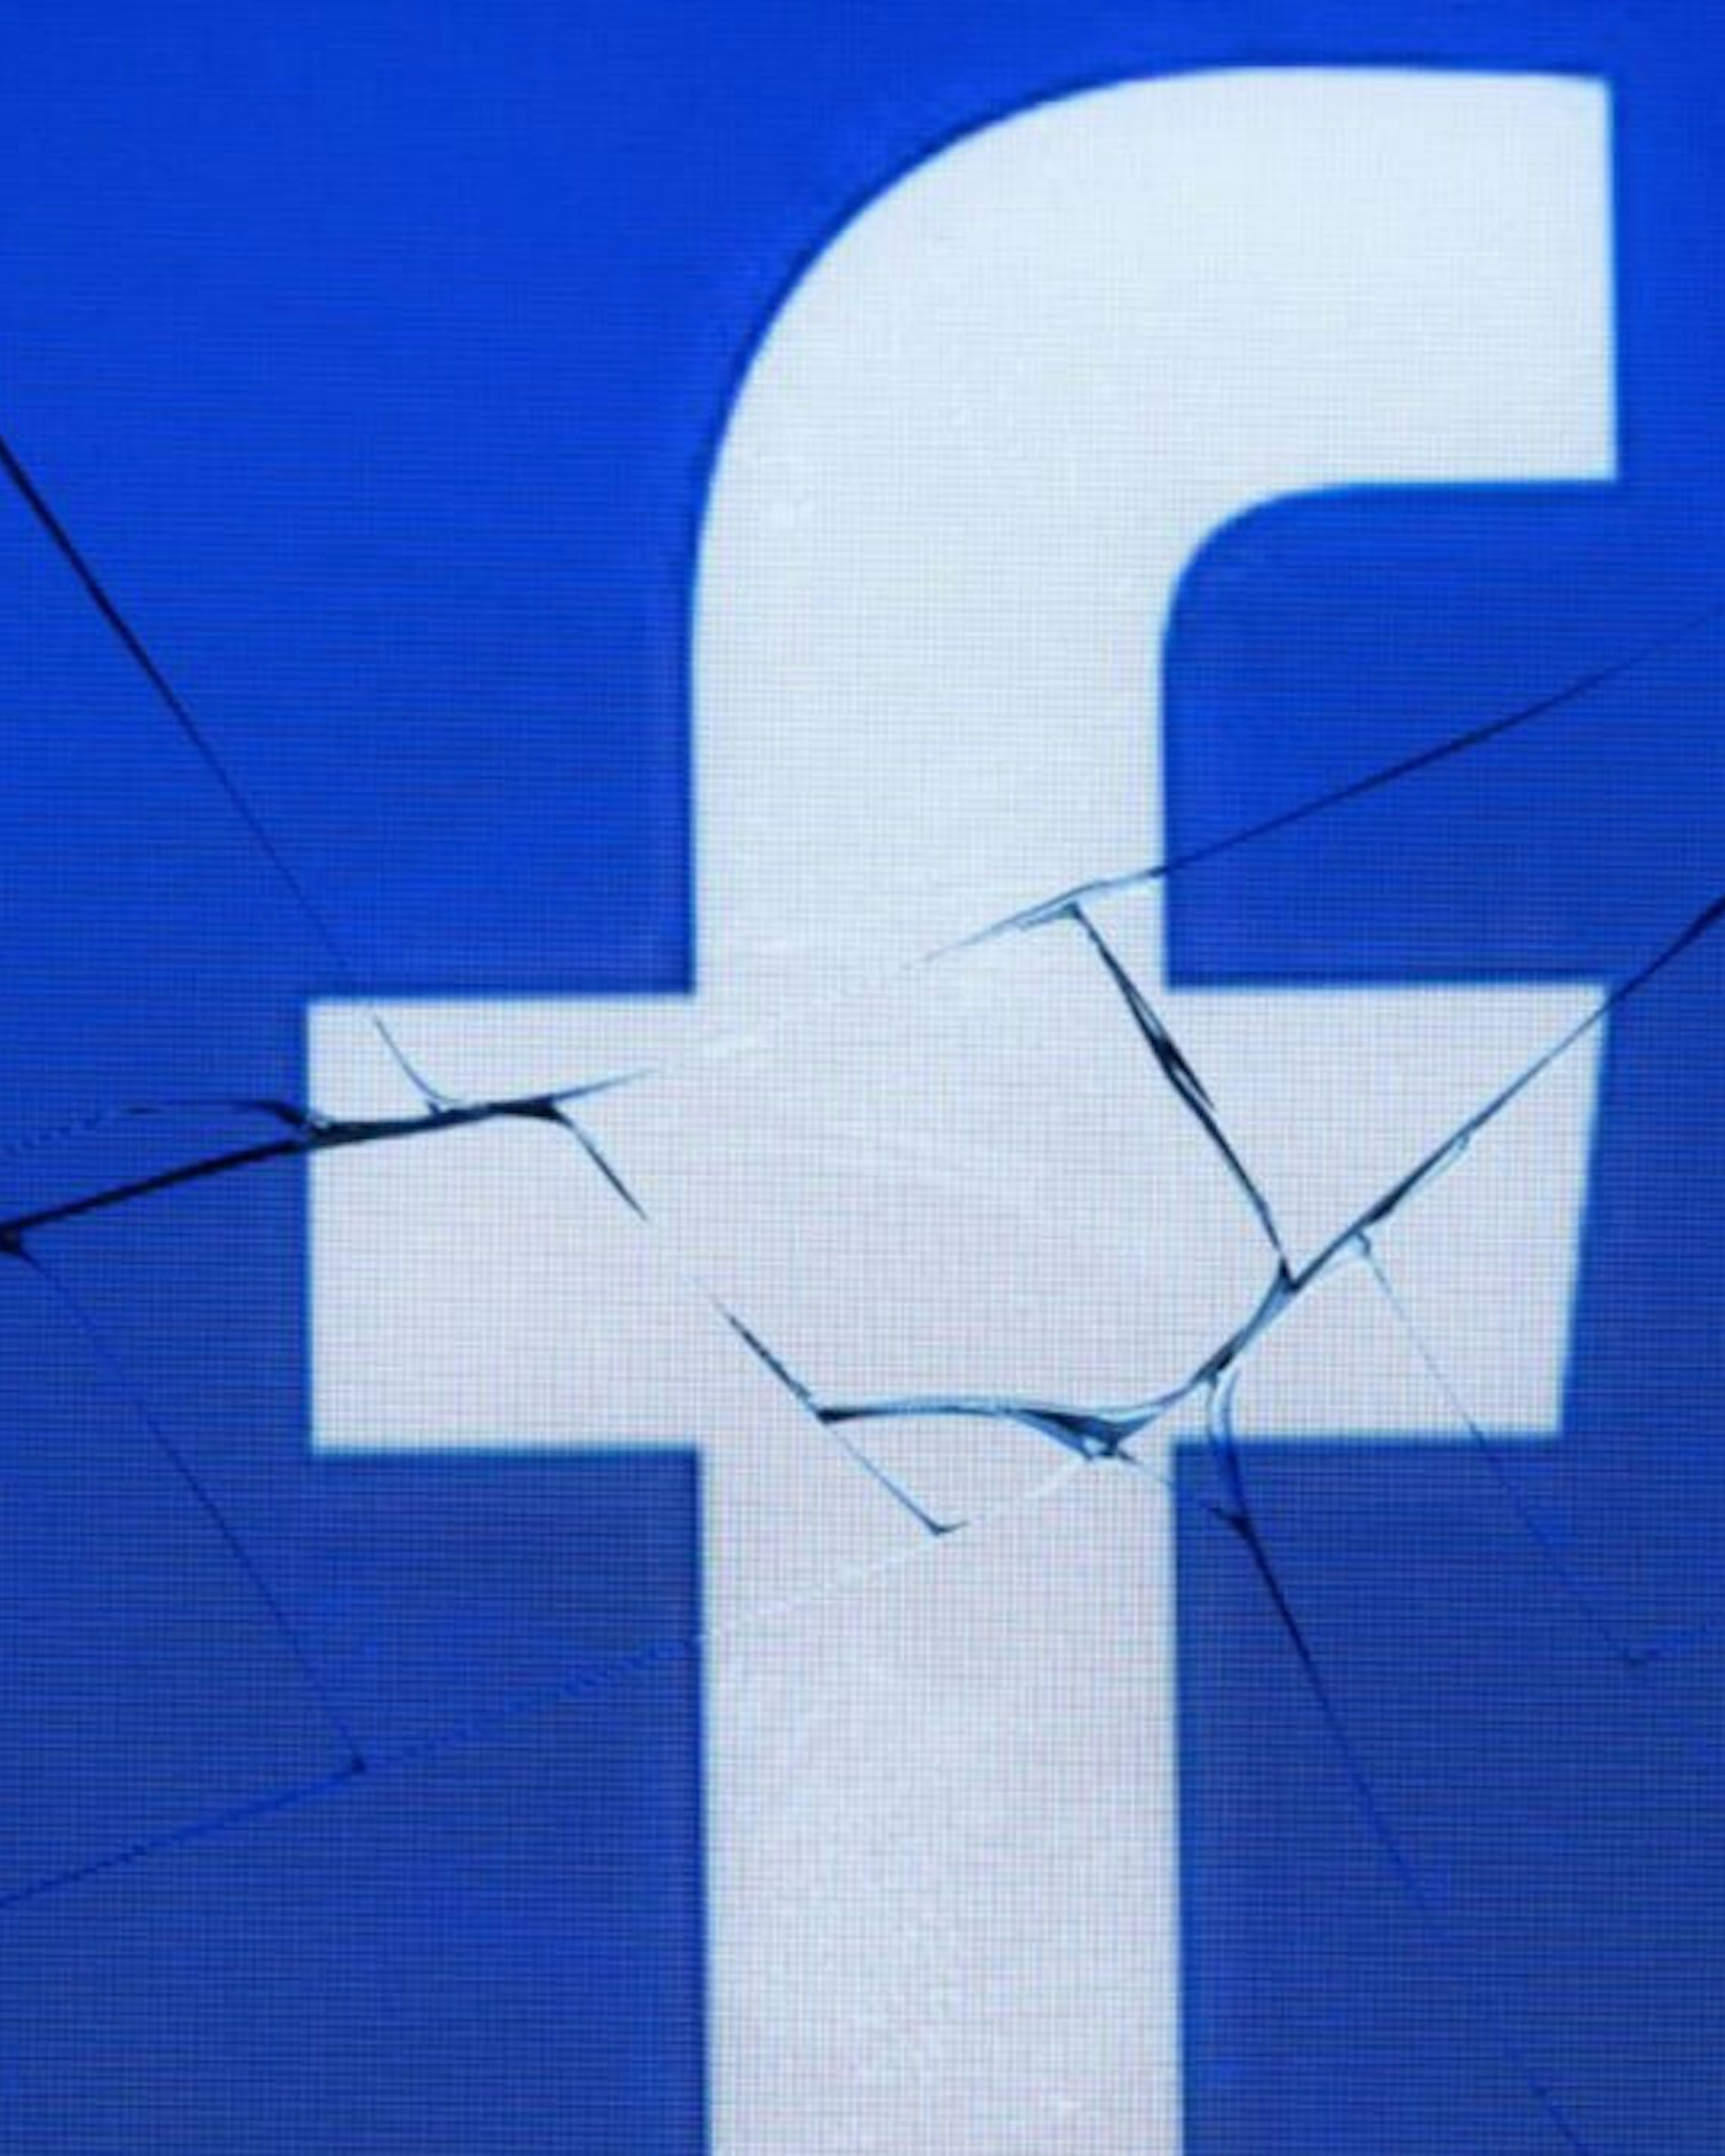 A picture taken in Paris on May 16, 2018 shows the logo of the social network Facebook on a broken screen of a mobile phone.